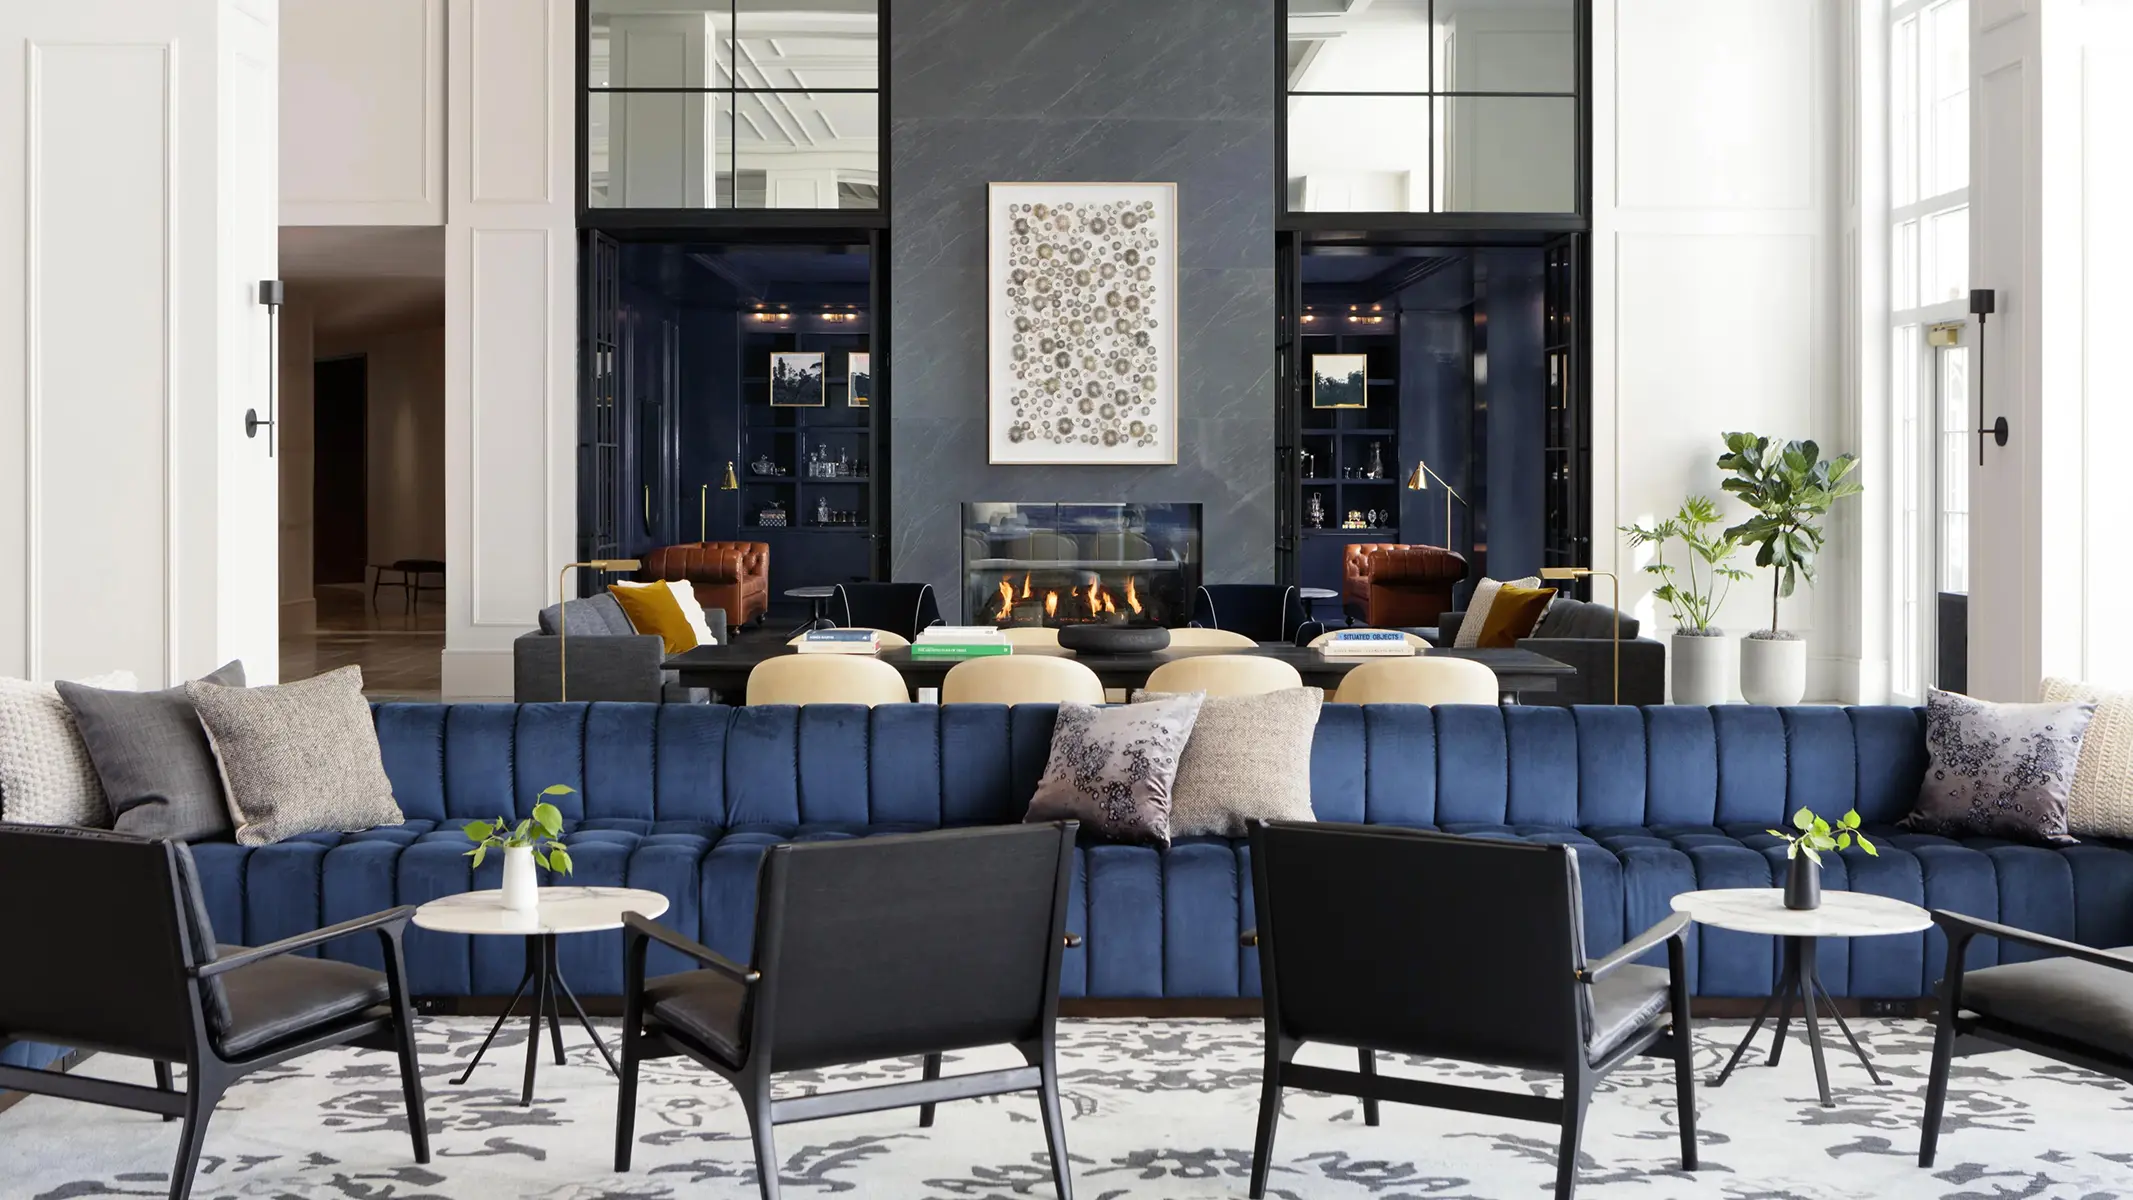 Kimpton hotel, one of the hotels you could redeem for less if you use our guide on how to buy IHG points